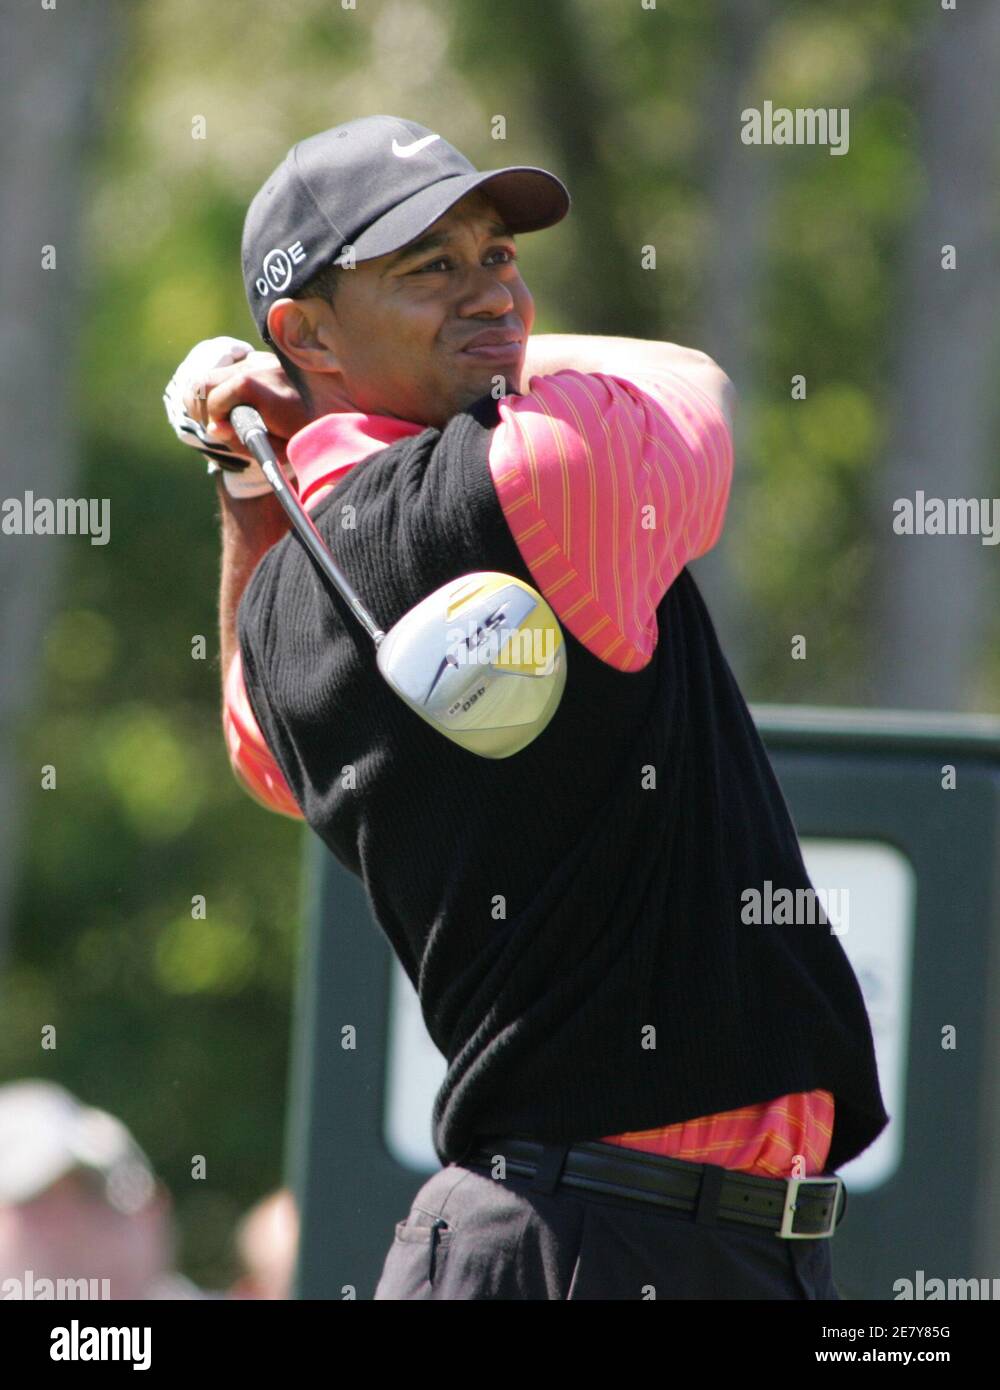 Tiger Woods of the U.S. tees off on the seventh hole during the final round at The Players Championship golf tournament in Ponte Vedra Beach, Florida on March 26, 2006. REUTERS/Rick Fowler Stock Photo